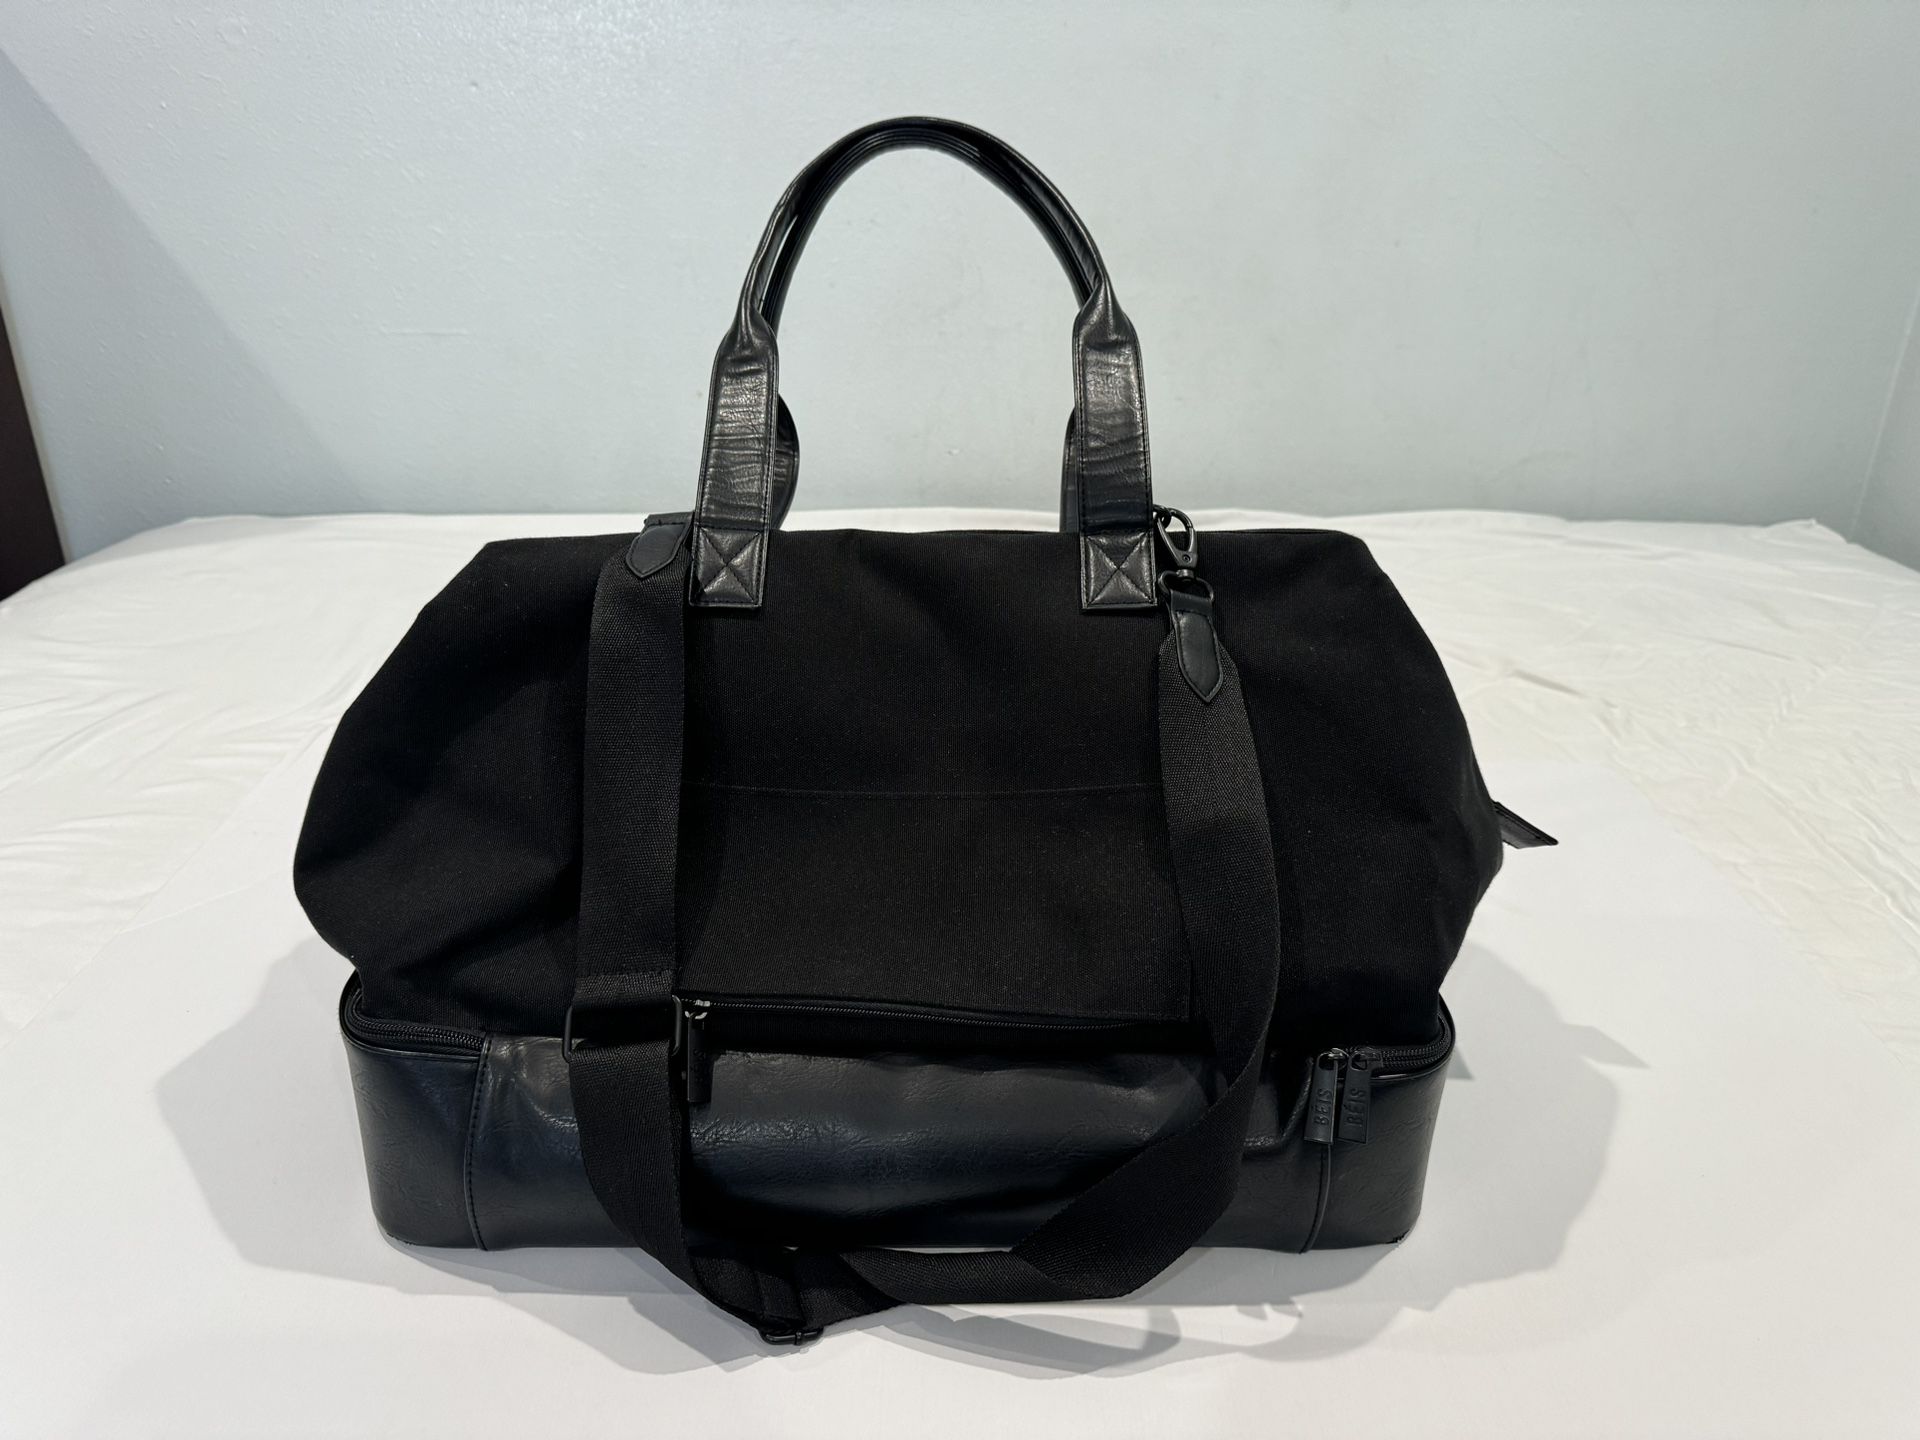 Beautiful Beis Weekend Travel Bag In Black With Show Compartment